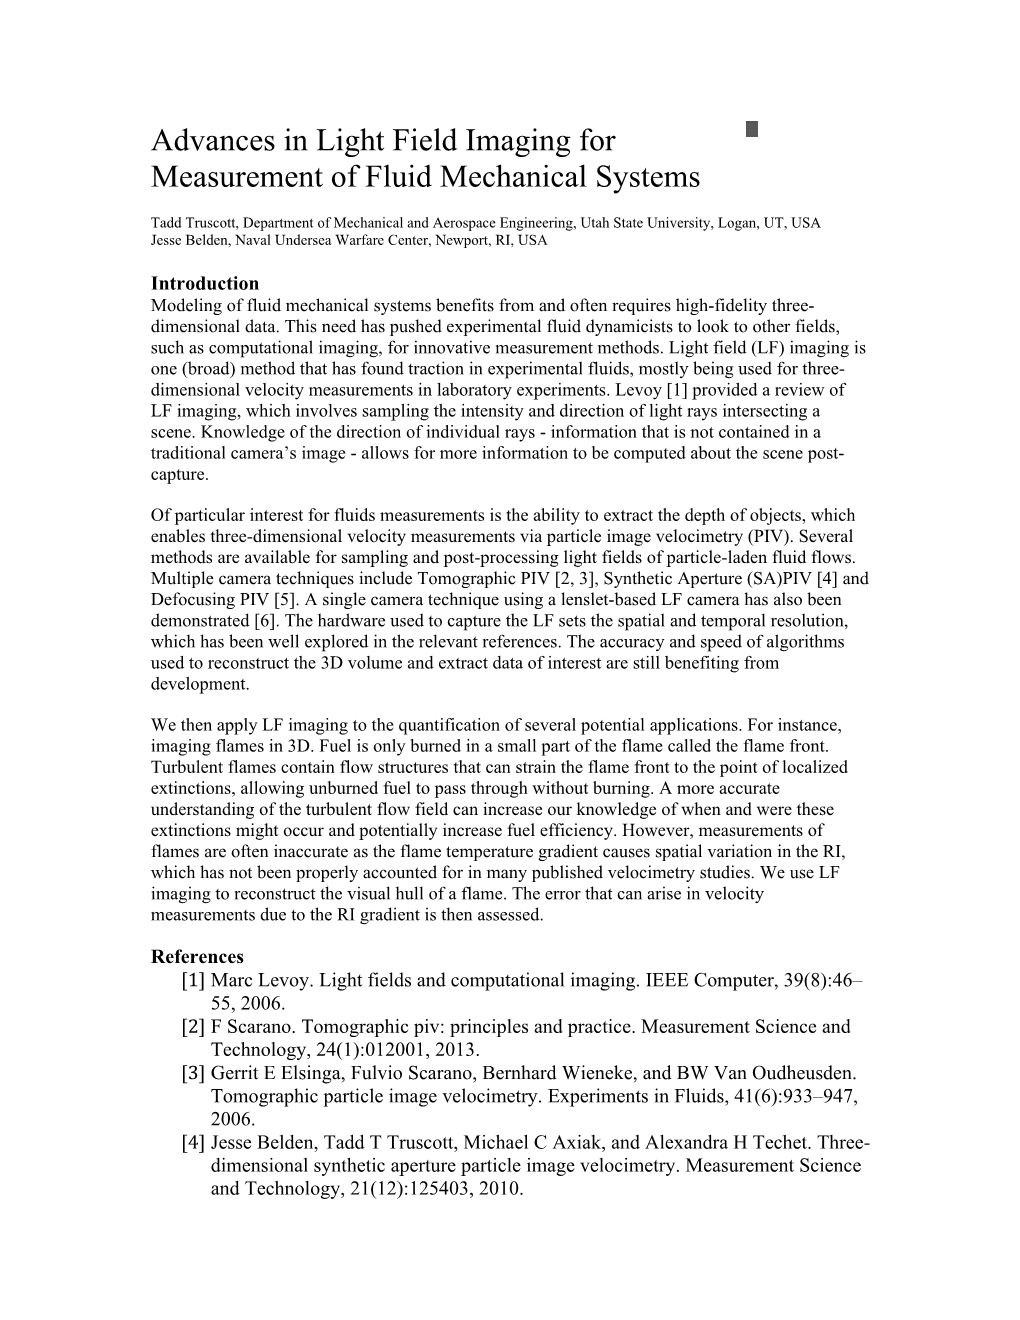 Advances in Light Field Imaging for Measurement of Fluid Mechanical Systems